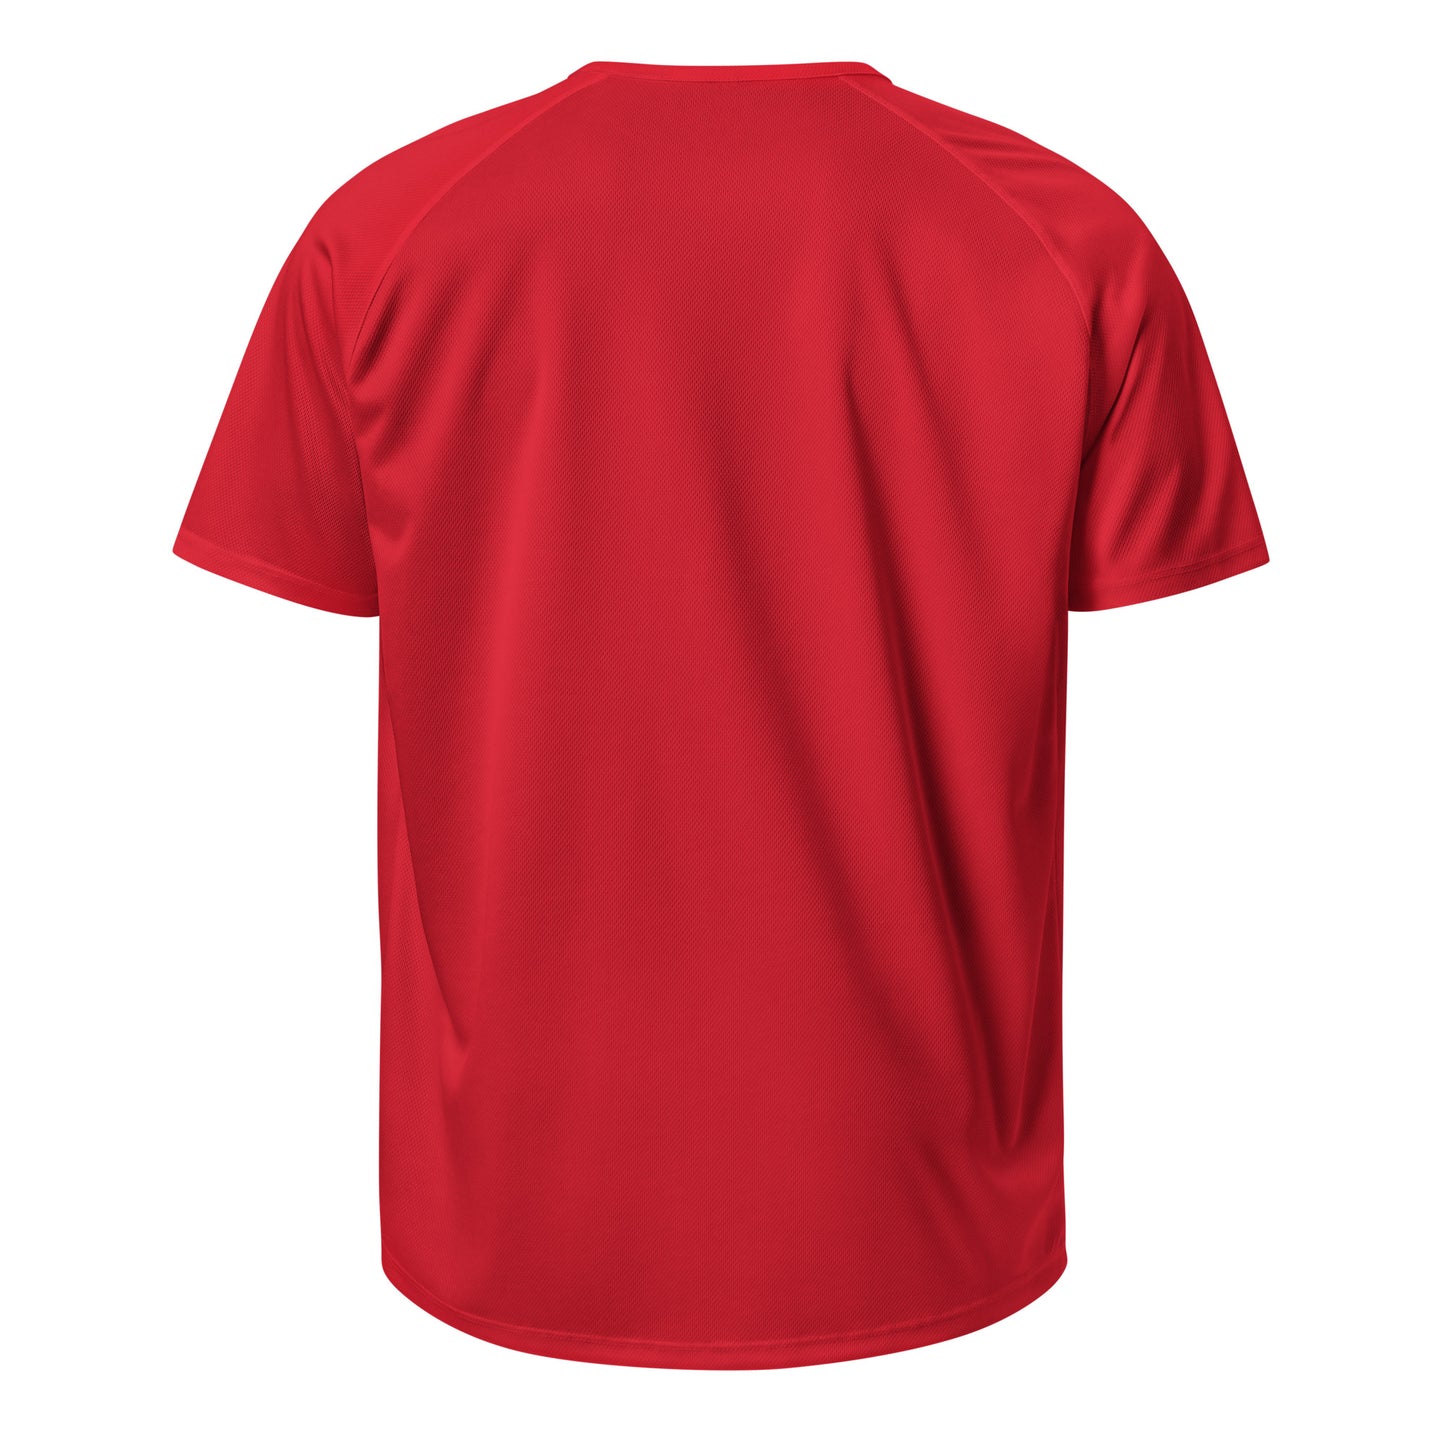 E134 - Sports/Breathable Fabric (MX win : Red)